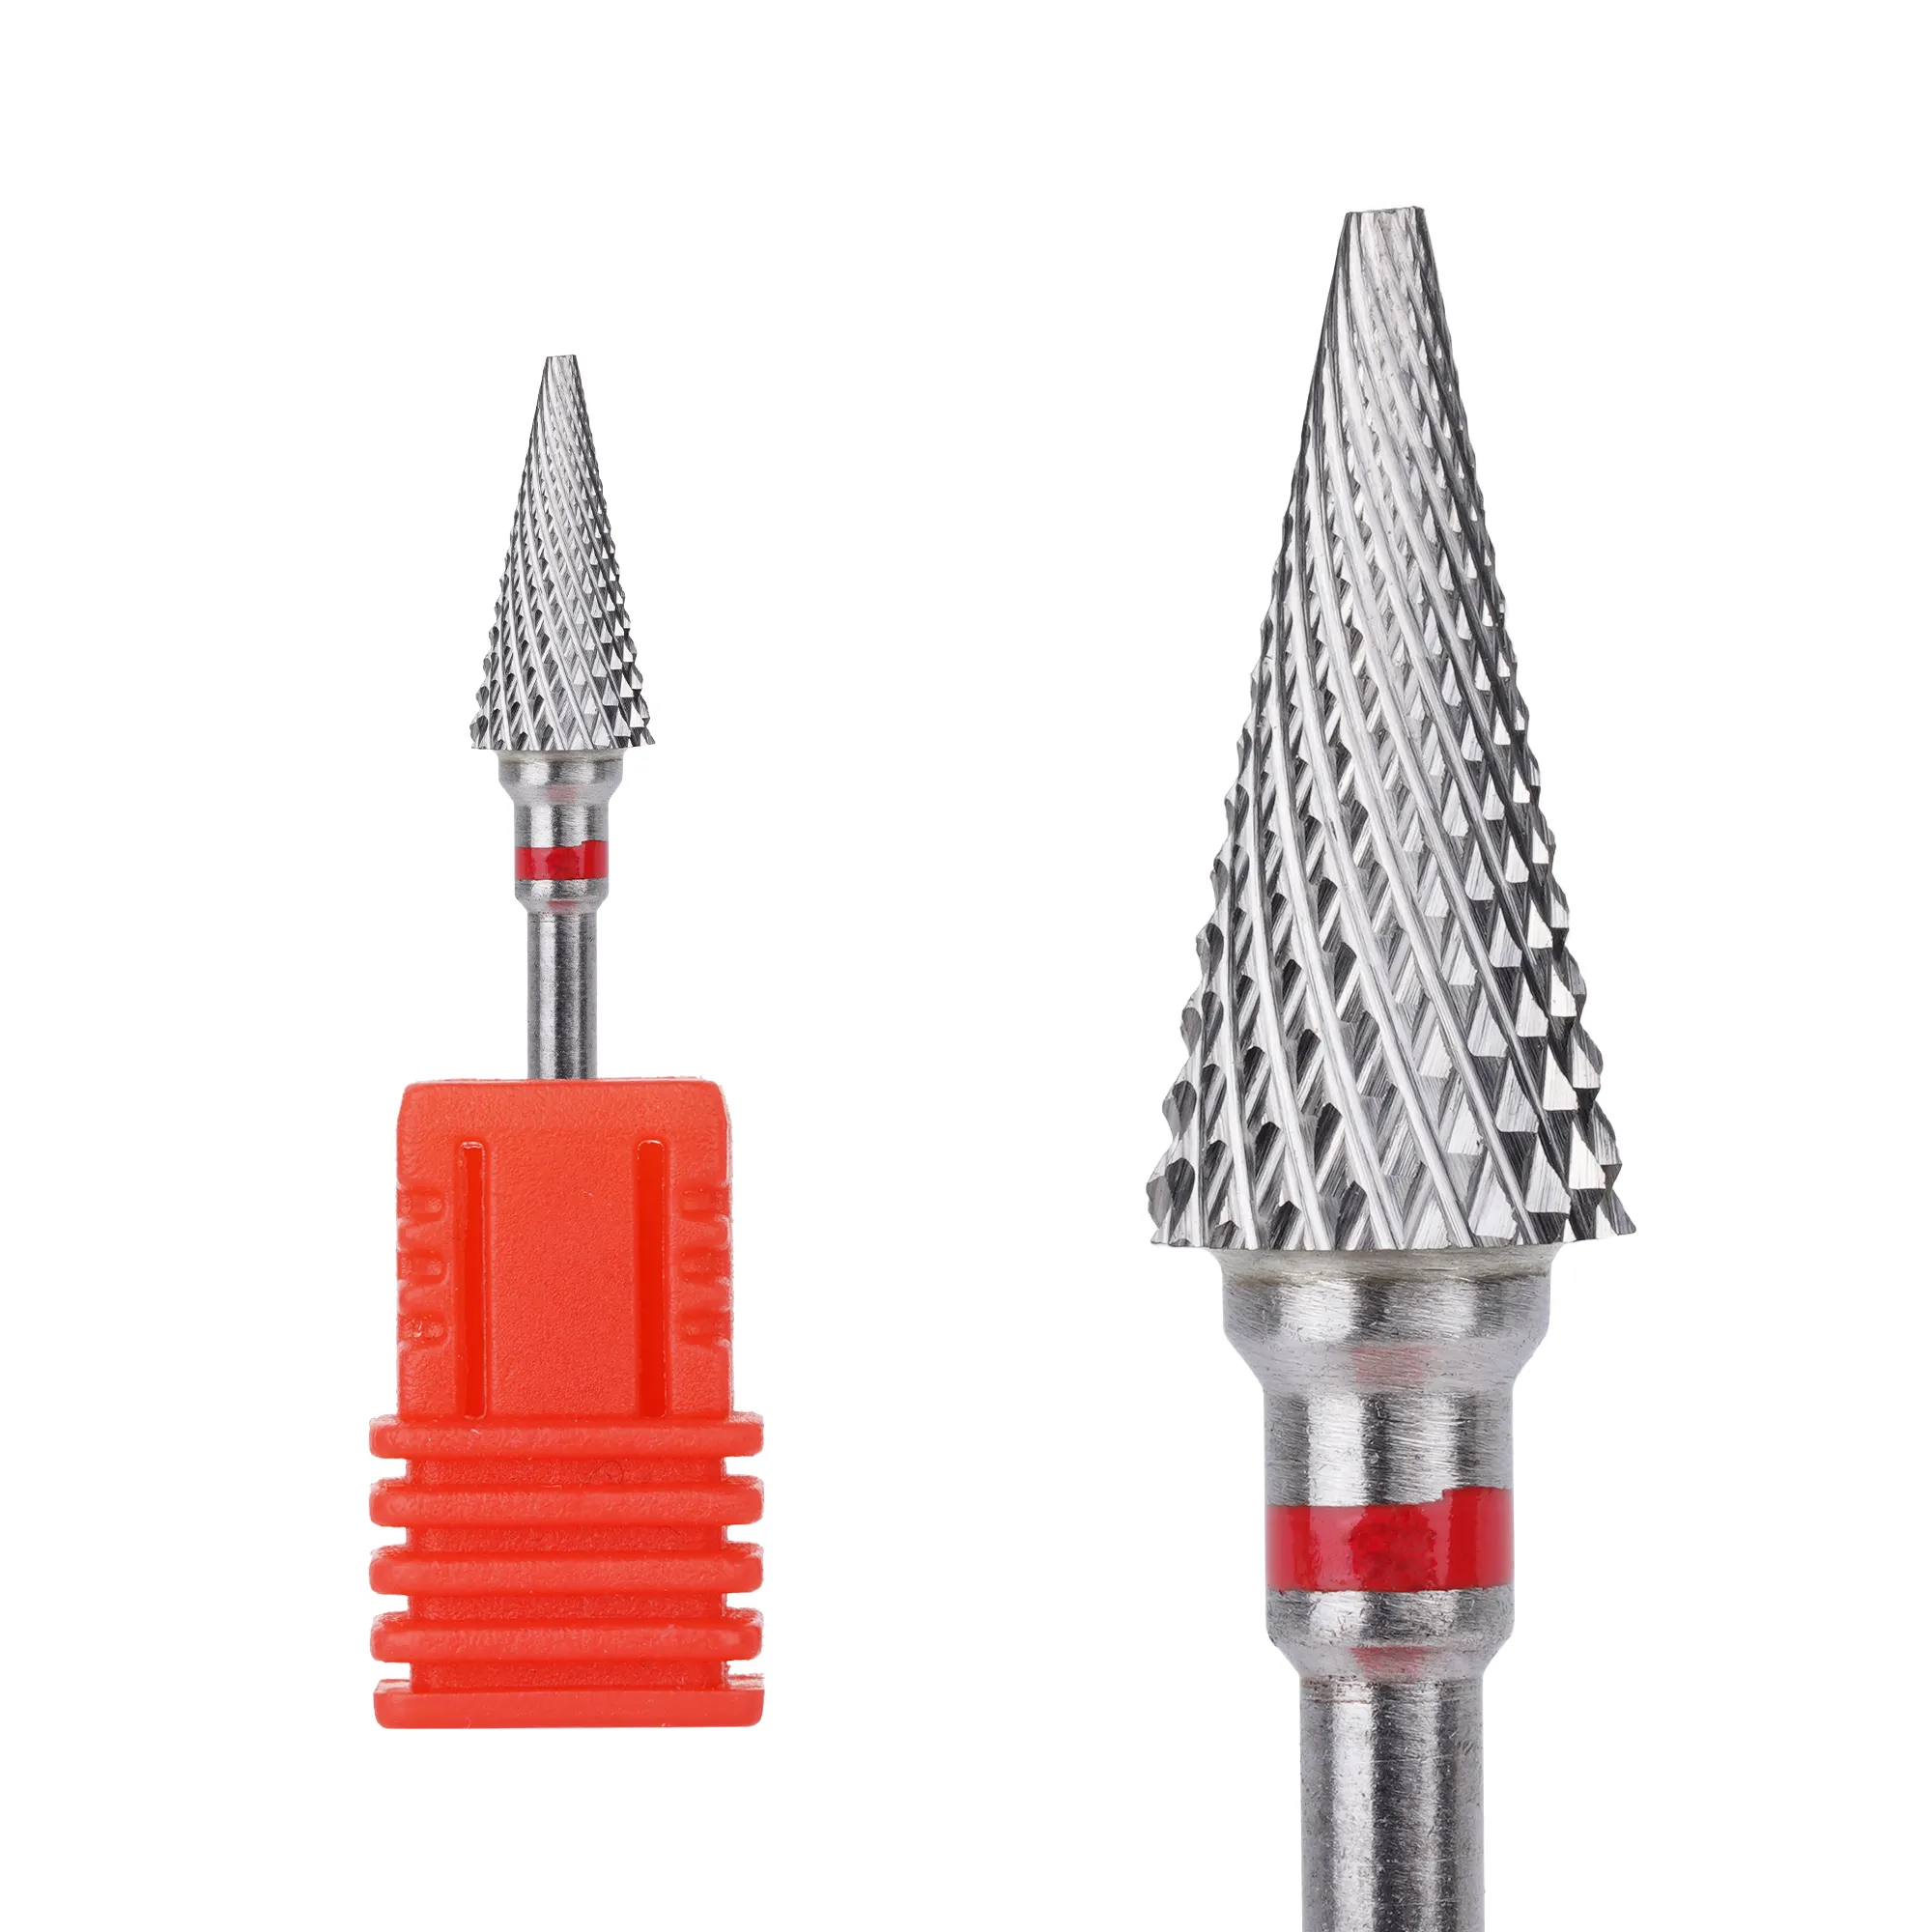 Good Carbide Tungsten Nail Bits Milling Cutter Electric Nail Drill Bit Pedicure Cuticle Clean Tools For Nail Polish And Removing